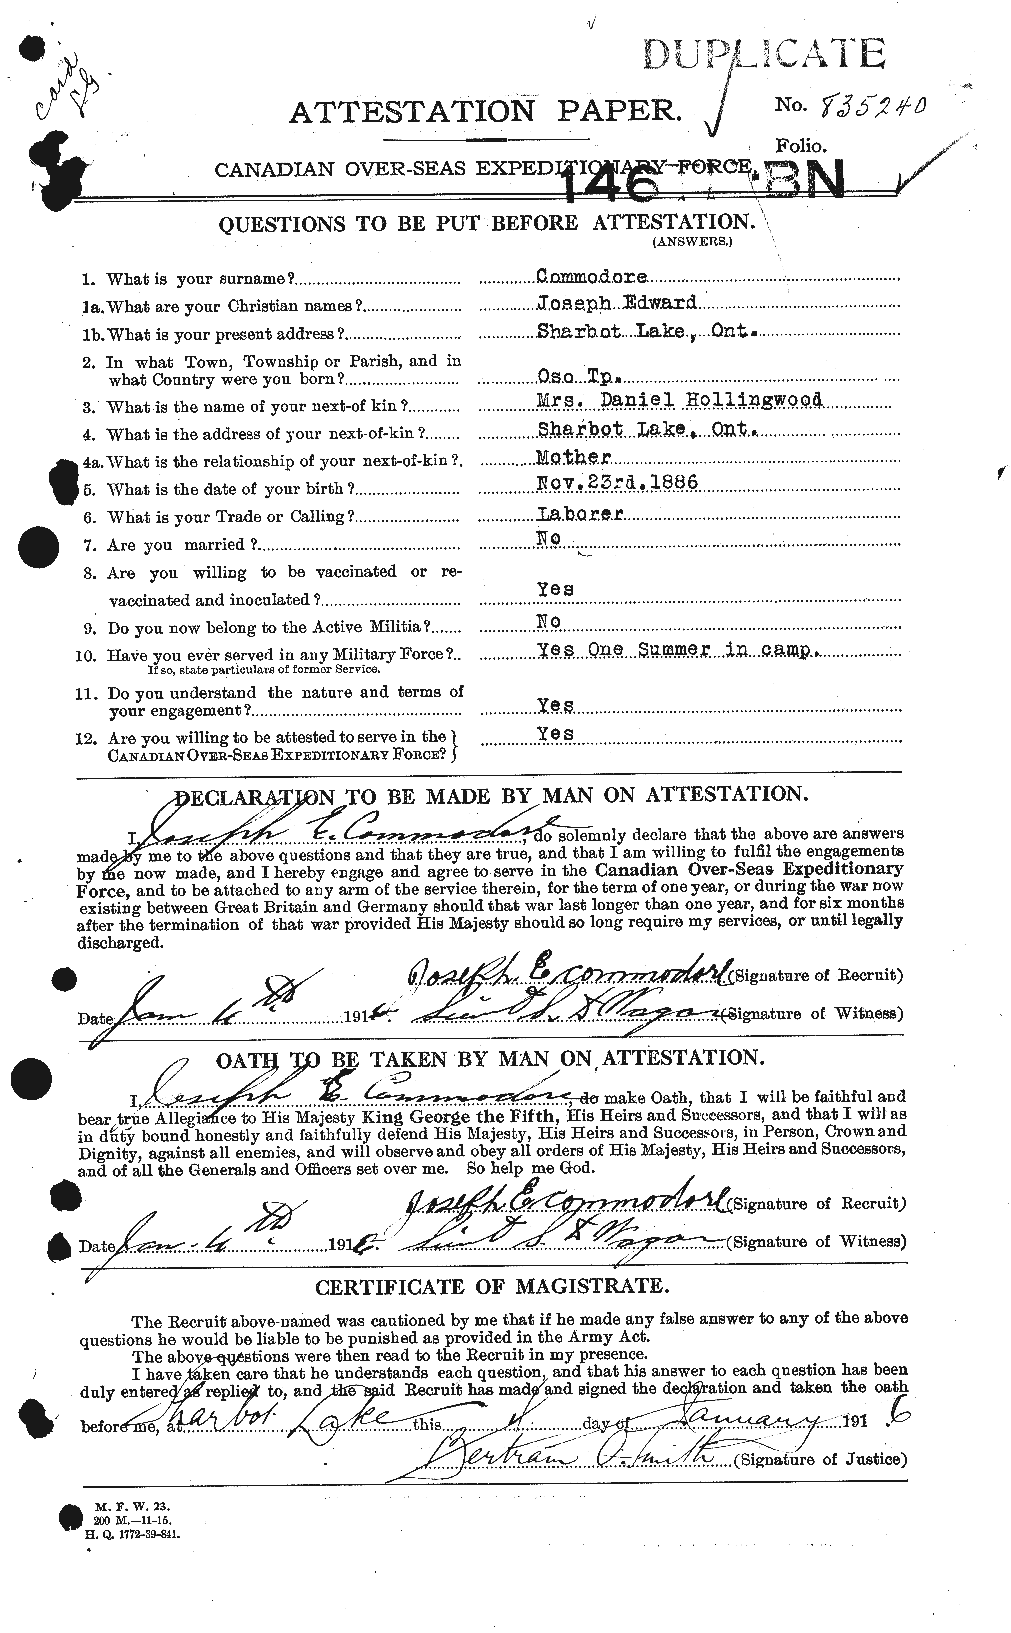 Personnel Records of the First World War - CEF 068730a